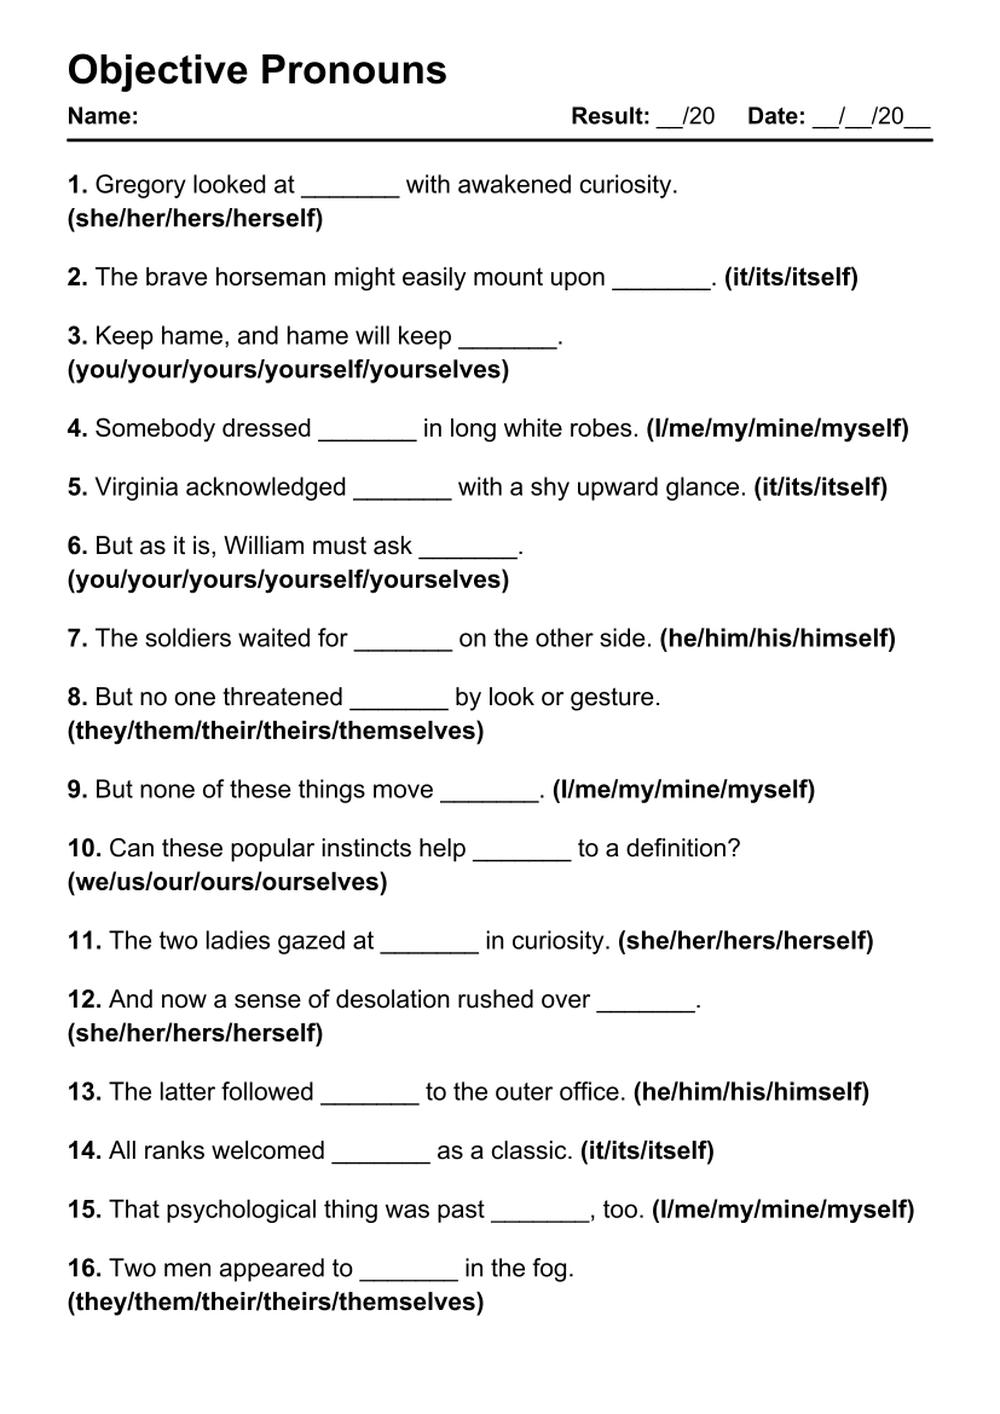 Printable Objective Pronouns Exercises - PDF Worksheet with Answers - Test 83